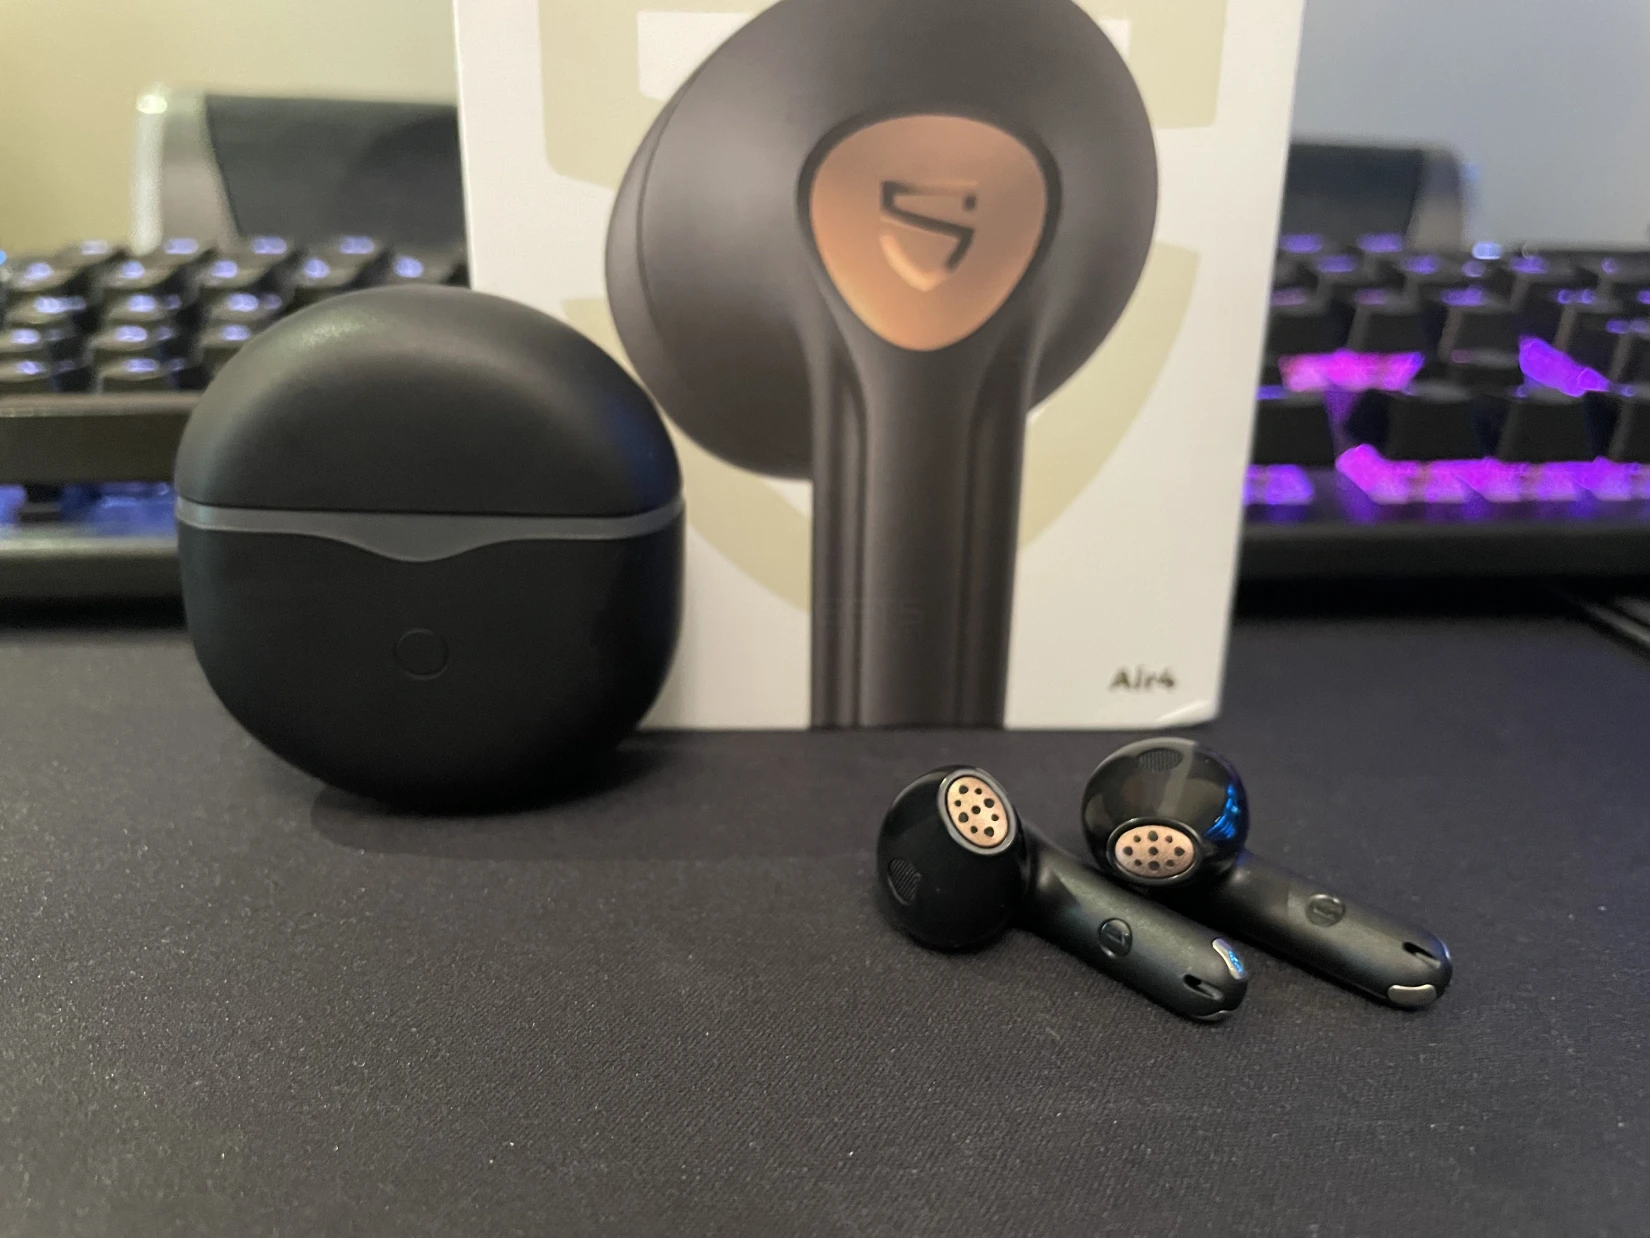 Air4 Pro earbuds: Your pocket-friendly option for quality audio